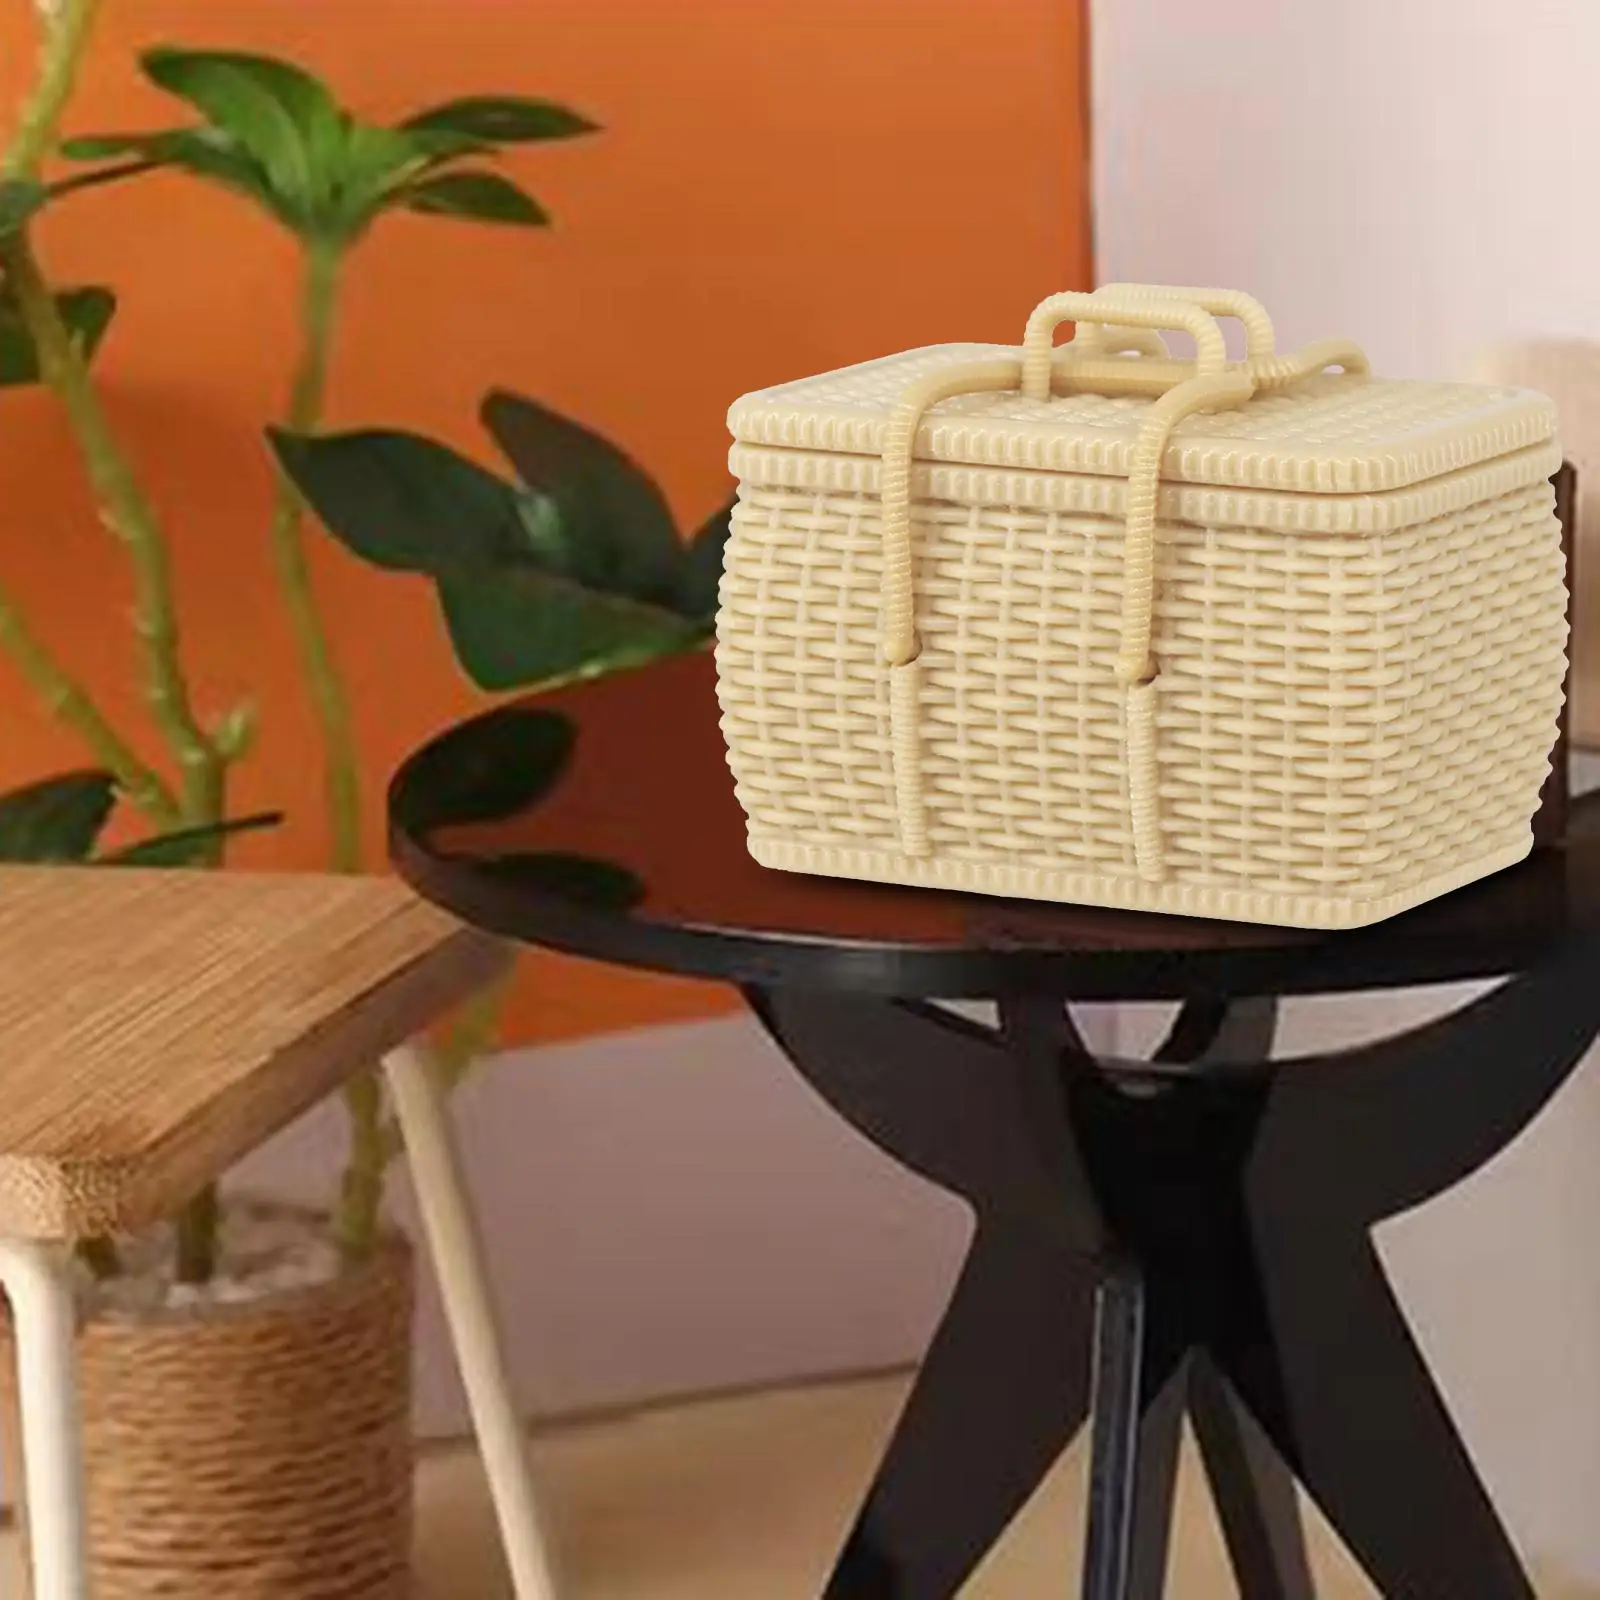 1/6 Doll House Basket Mini Furniture Model for Photography Prop DIY Scenery